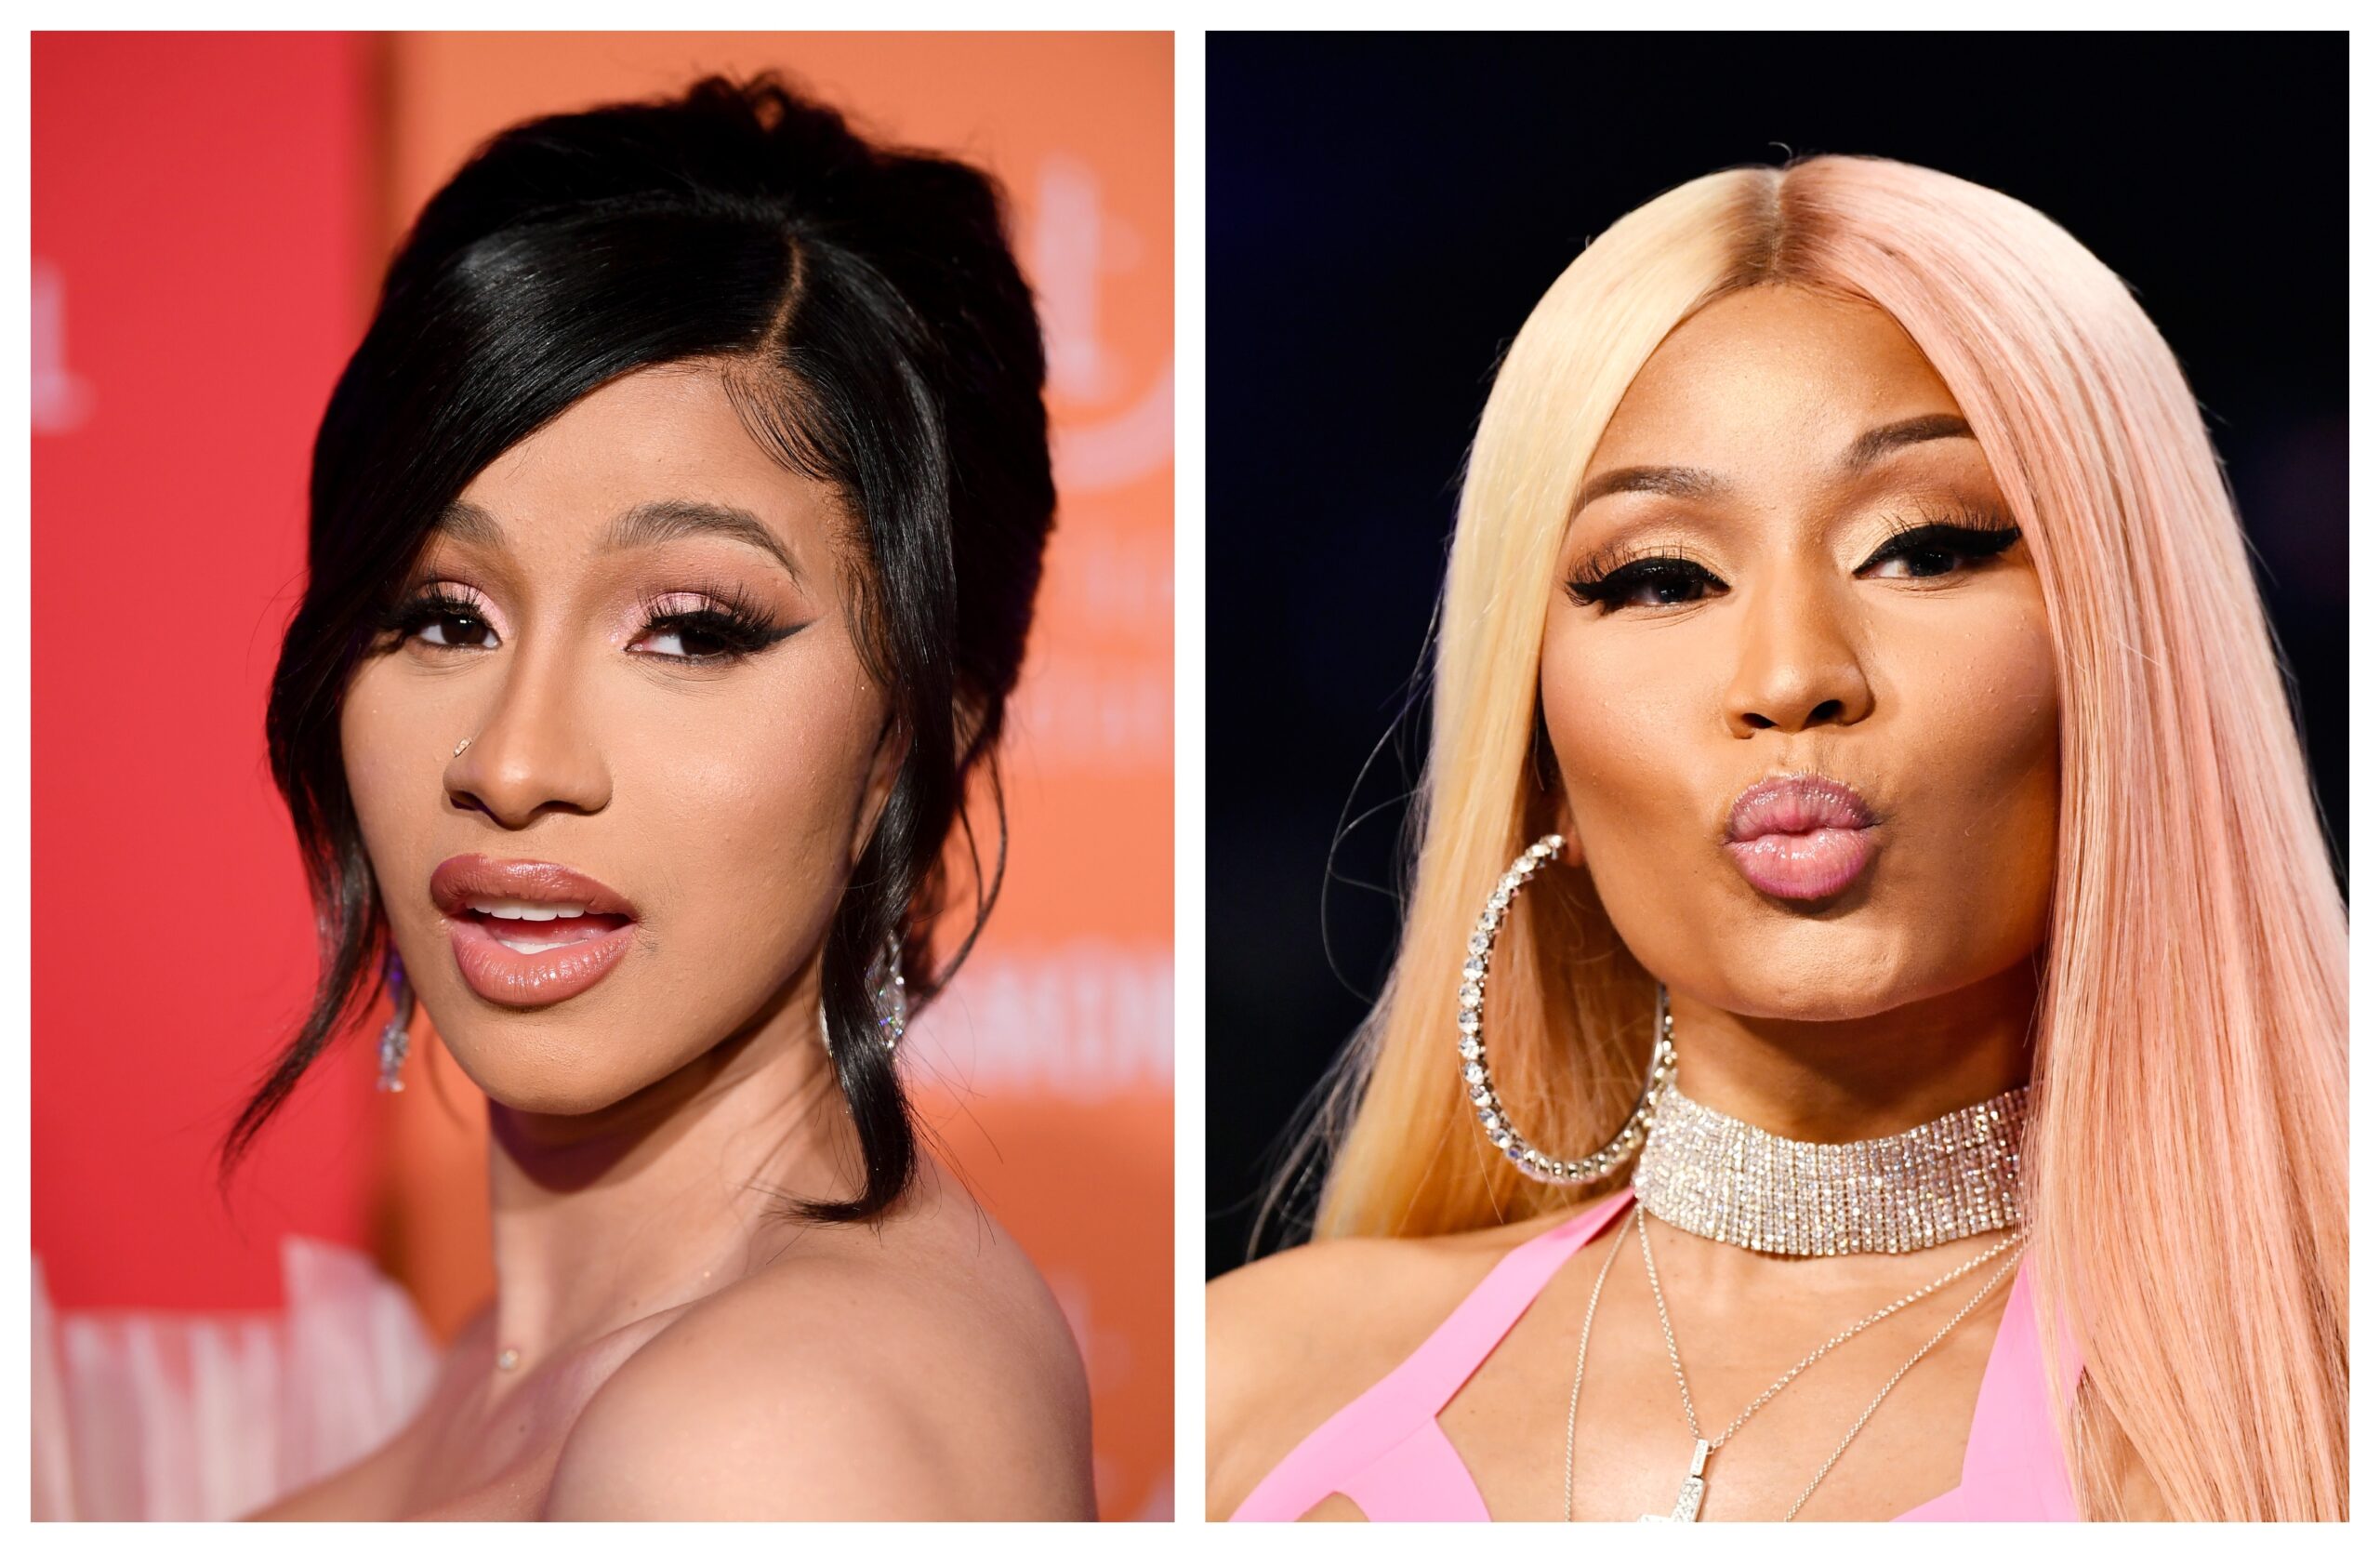 Cardi B claps back at Nicki Minaj fans after they accuse her of copying